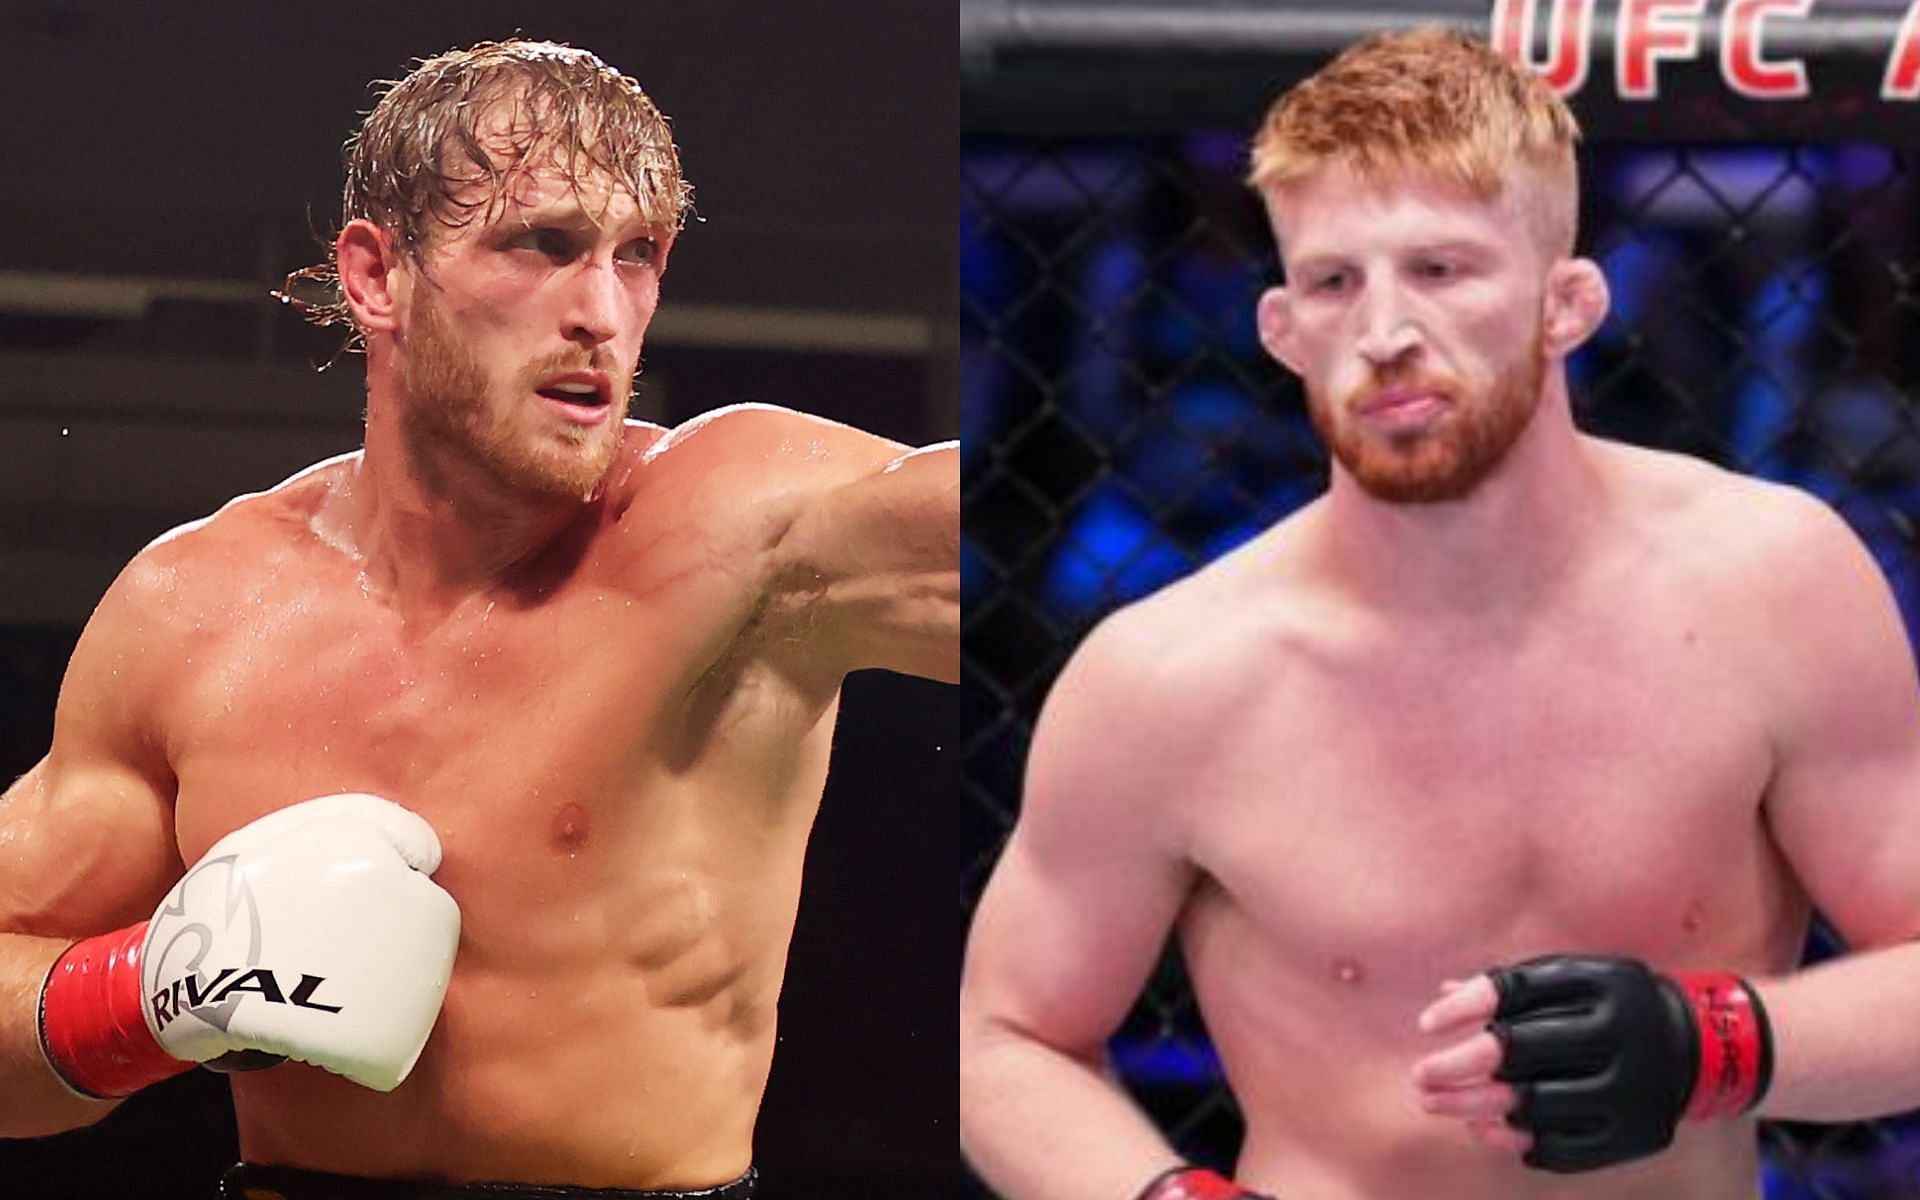 Logan Paul (left) and Bo Nickal (right). [Images courtesy: left image from Getty Images and right image from ufc.com]